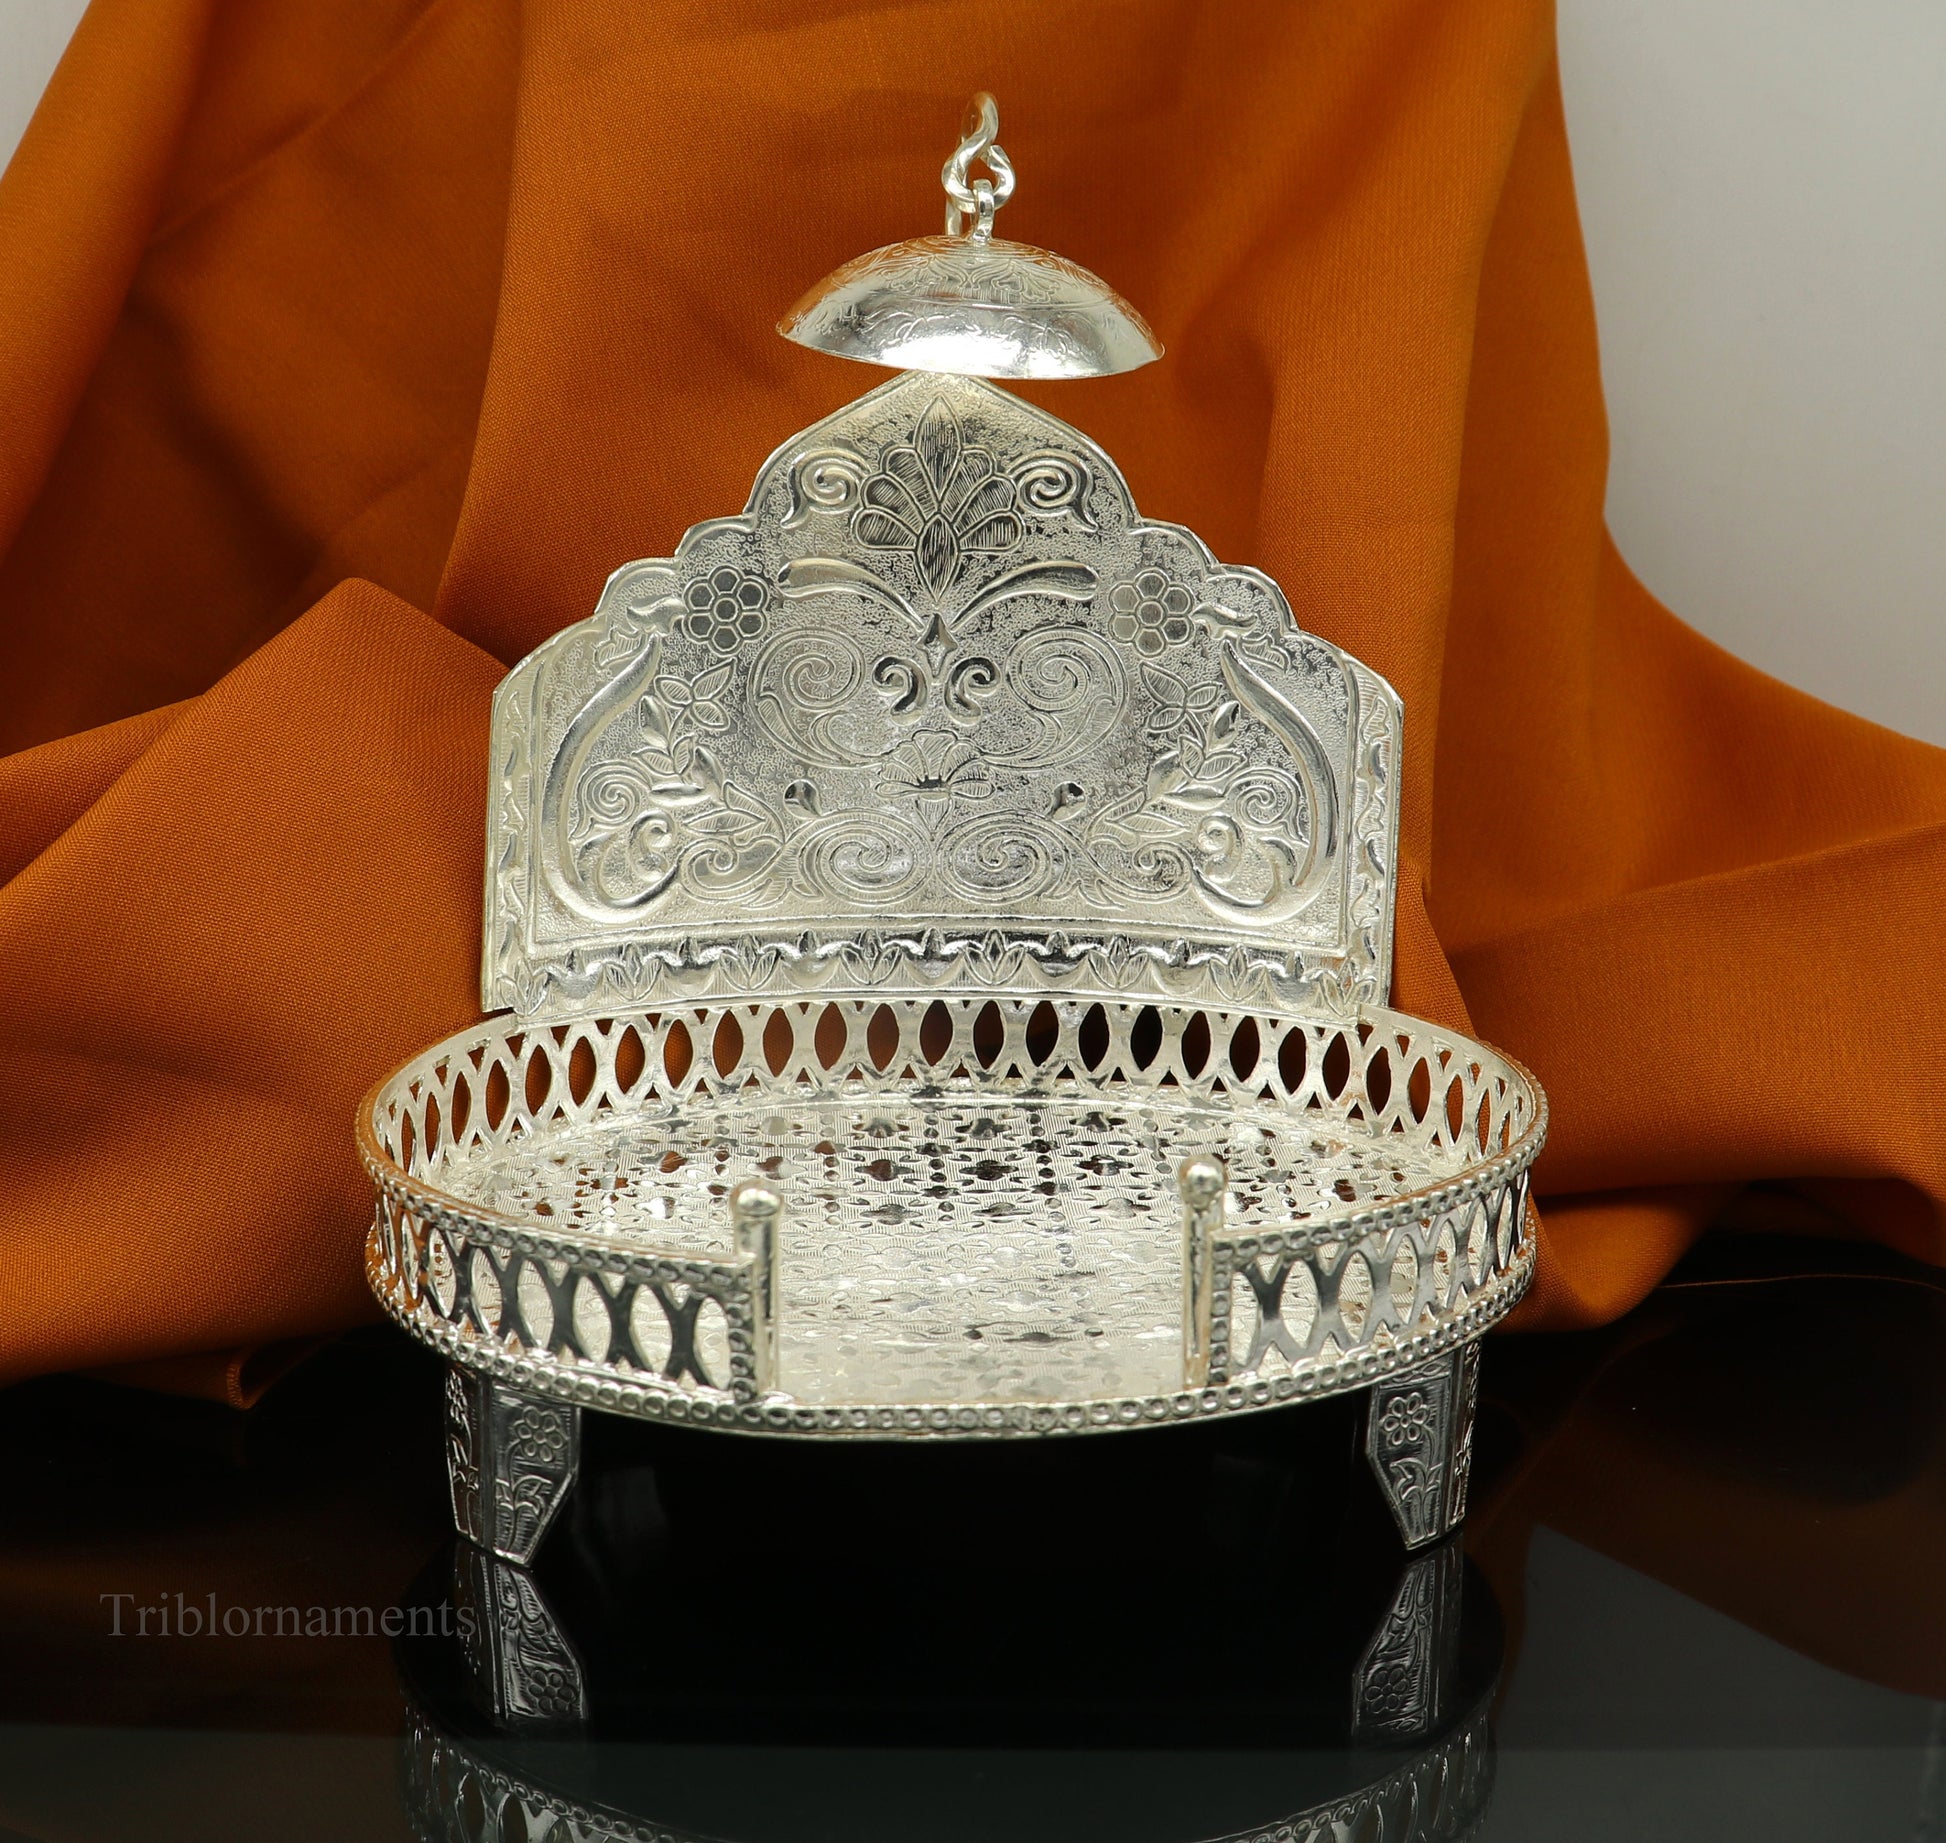 925 pure sterling silver handcrafted small singhasan, idol krishna , Ganesha throne, god statue's stand chair, temple puja article su471 - TRIBAL ORNAMENTS